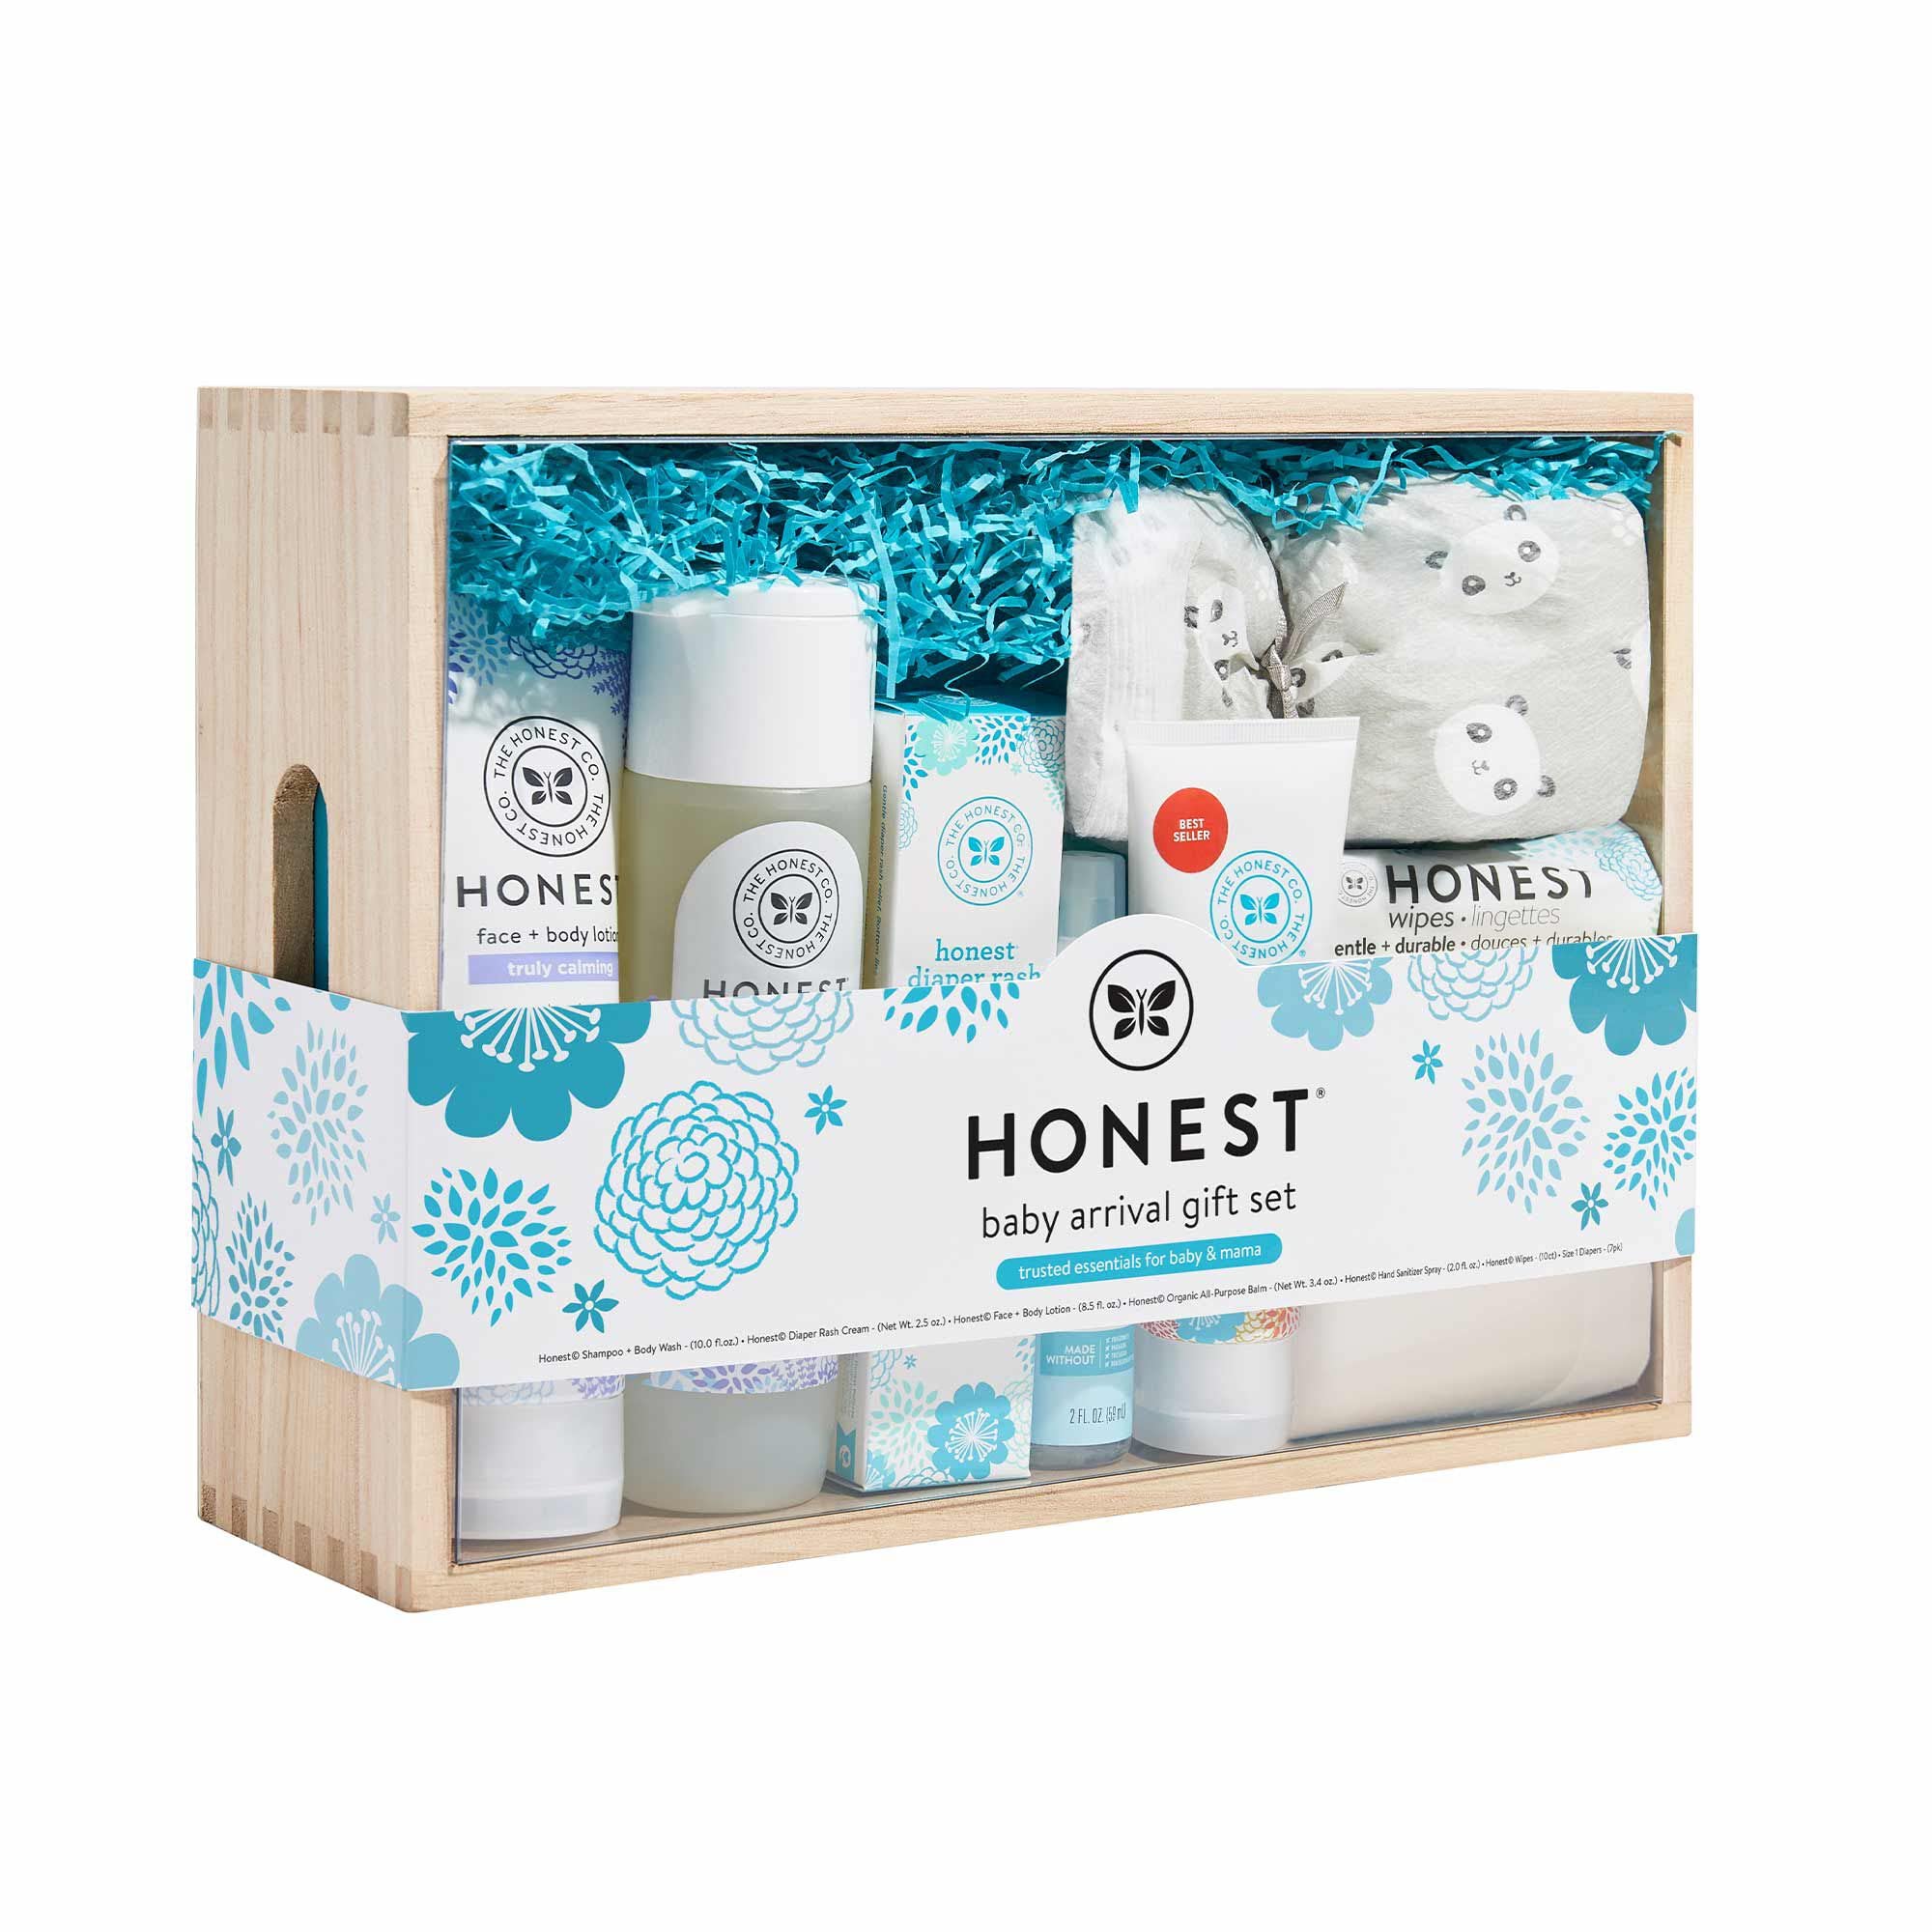 $35.33 /w S&S: The Honest Company Baby Arrival Gift Set